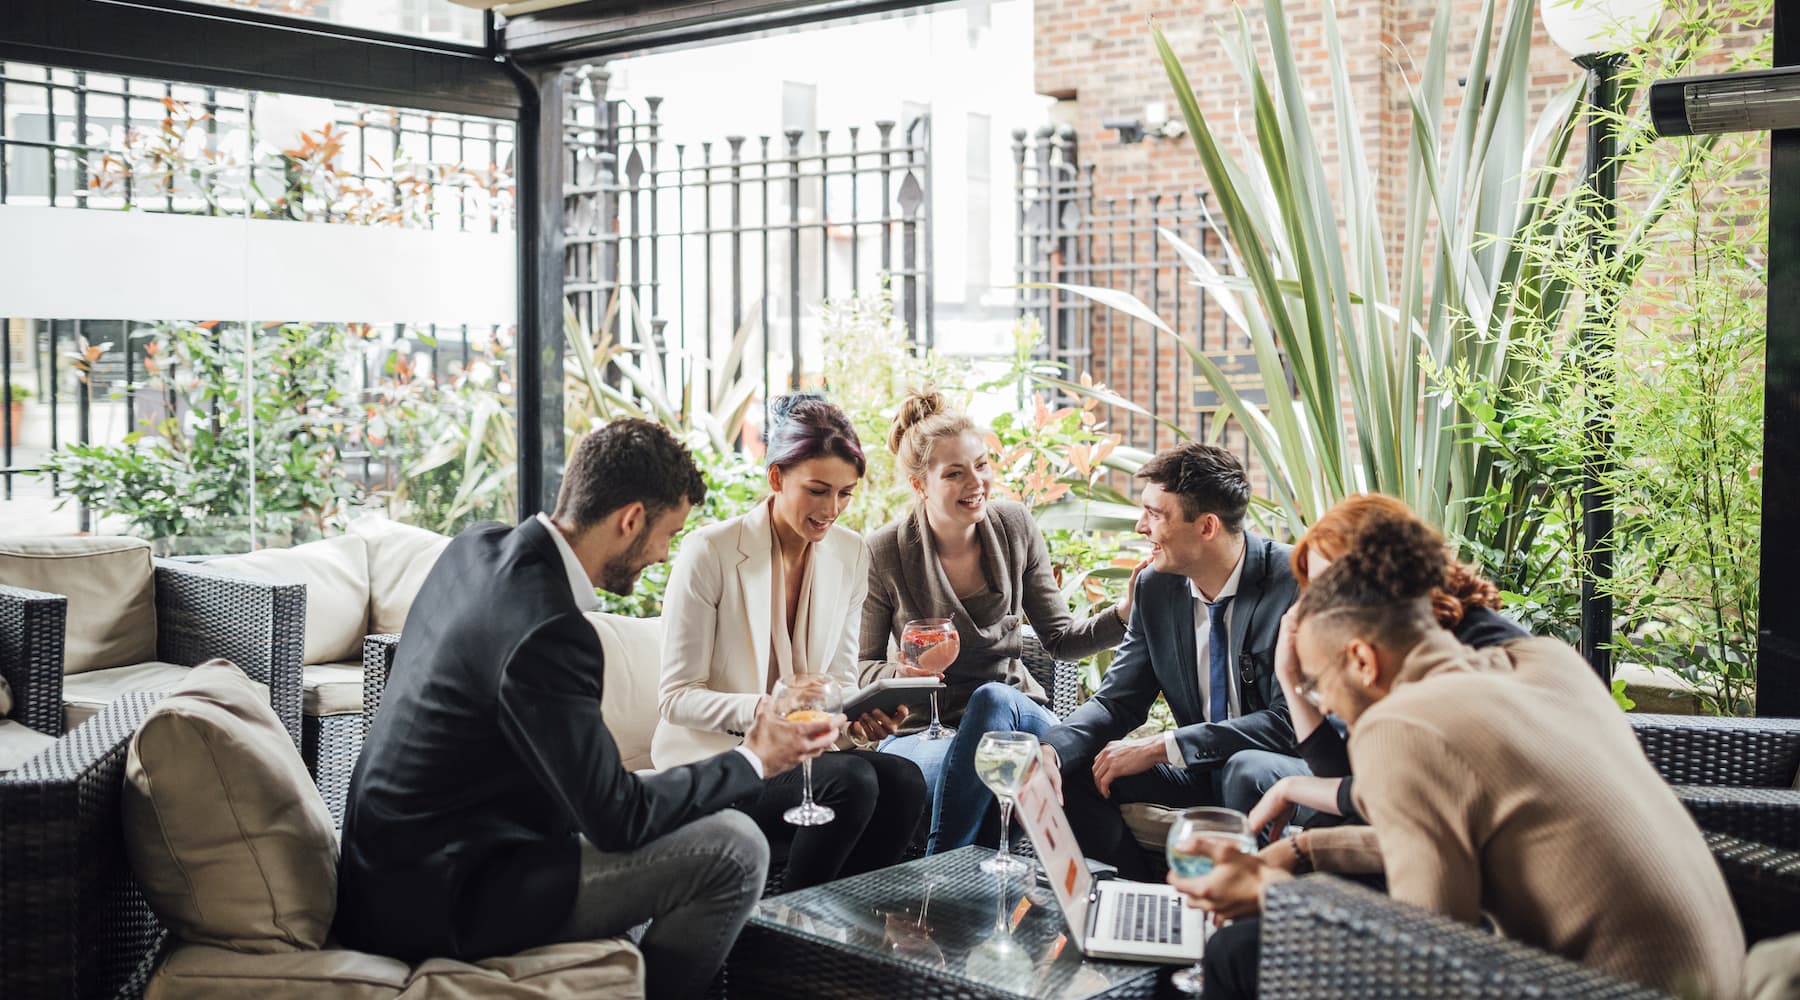 A group of small business owners networking at a local bar